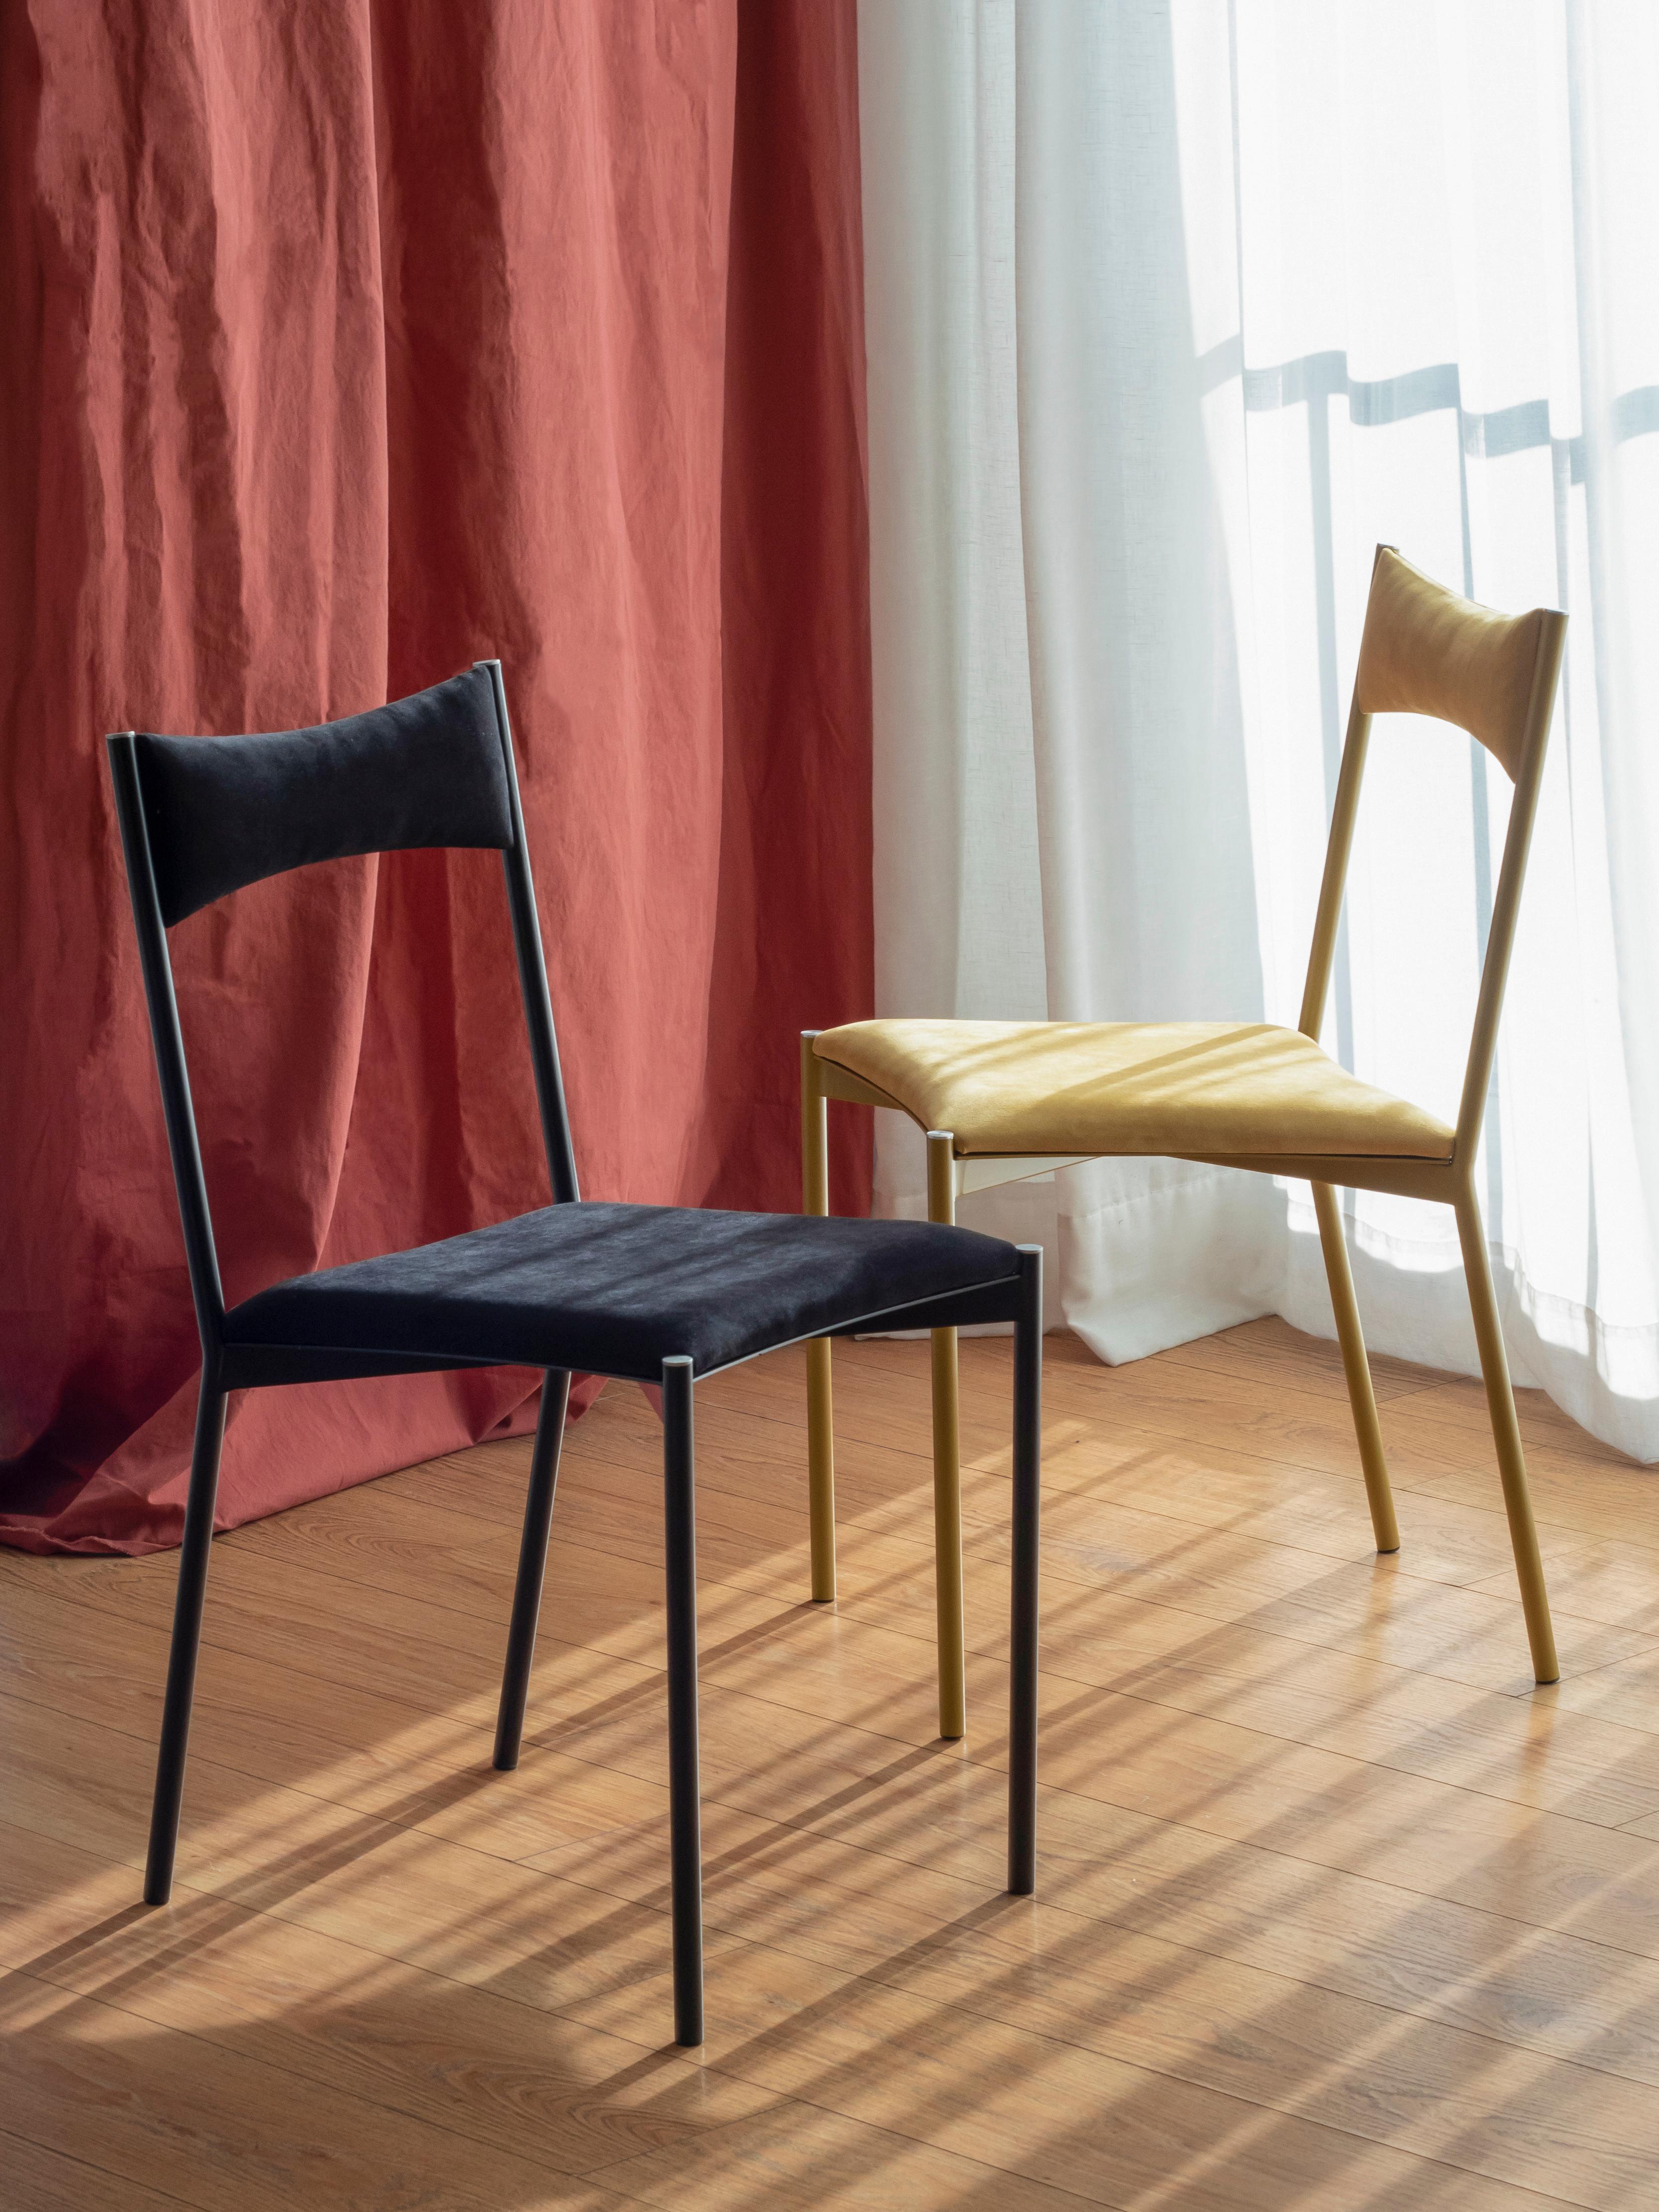 A set of 2 tensa chairs, yellow & black by Ries
Dimensions: W 40 x D 49,5 x H 82 cm 
Materials: Round steel tube, laser cut metal sheet, high density foam, velvet upholstery, aluminum/bronze caps
Matte powder coated painting (Finishings)

Also